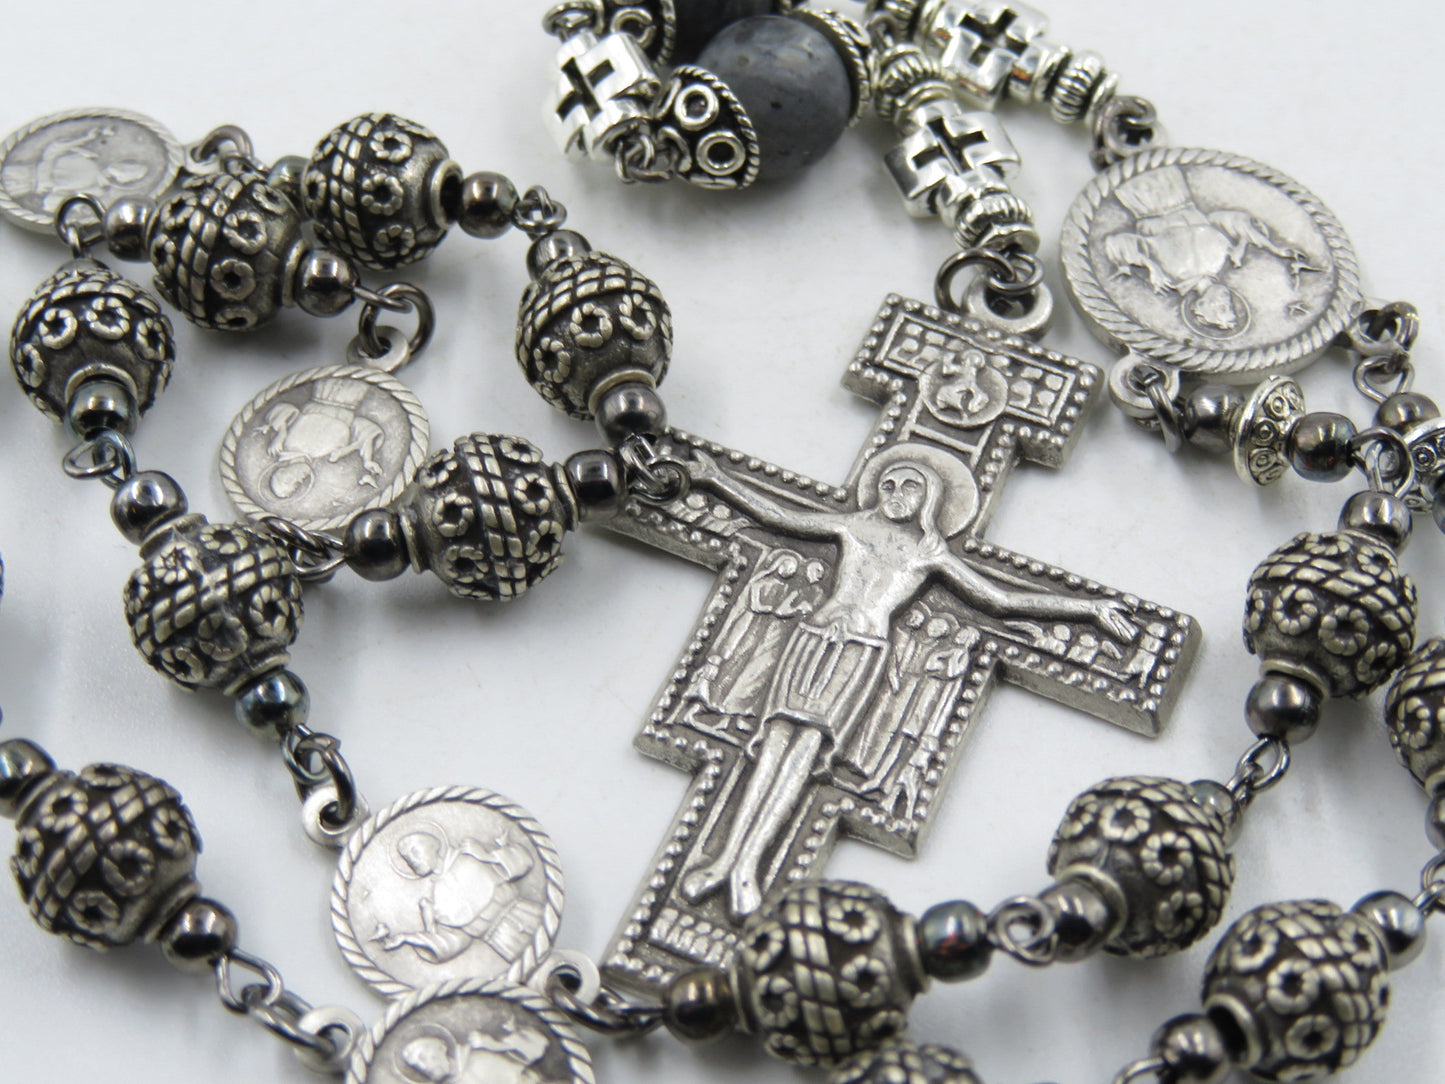 Vintage style Heirloom St Francis Of Assisi prayer Chaplet, St. Francis Crucifix, Vintage rosary, The Blessing Of St. Francis Crucifix.